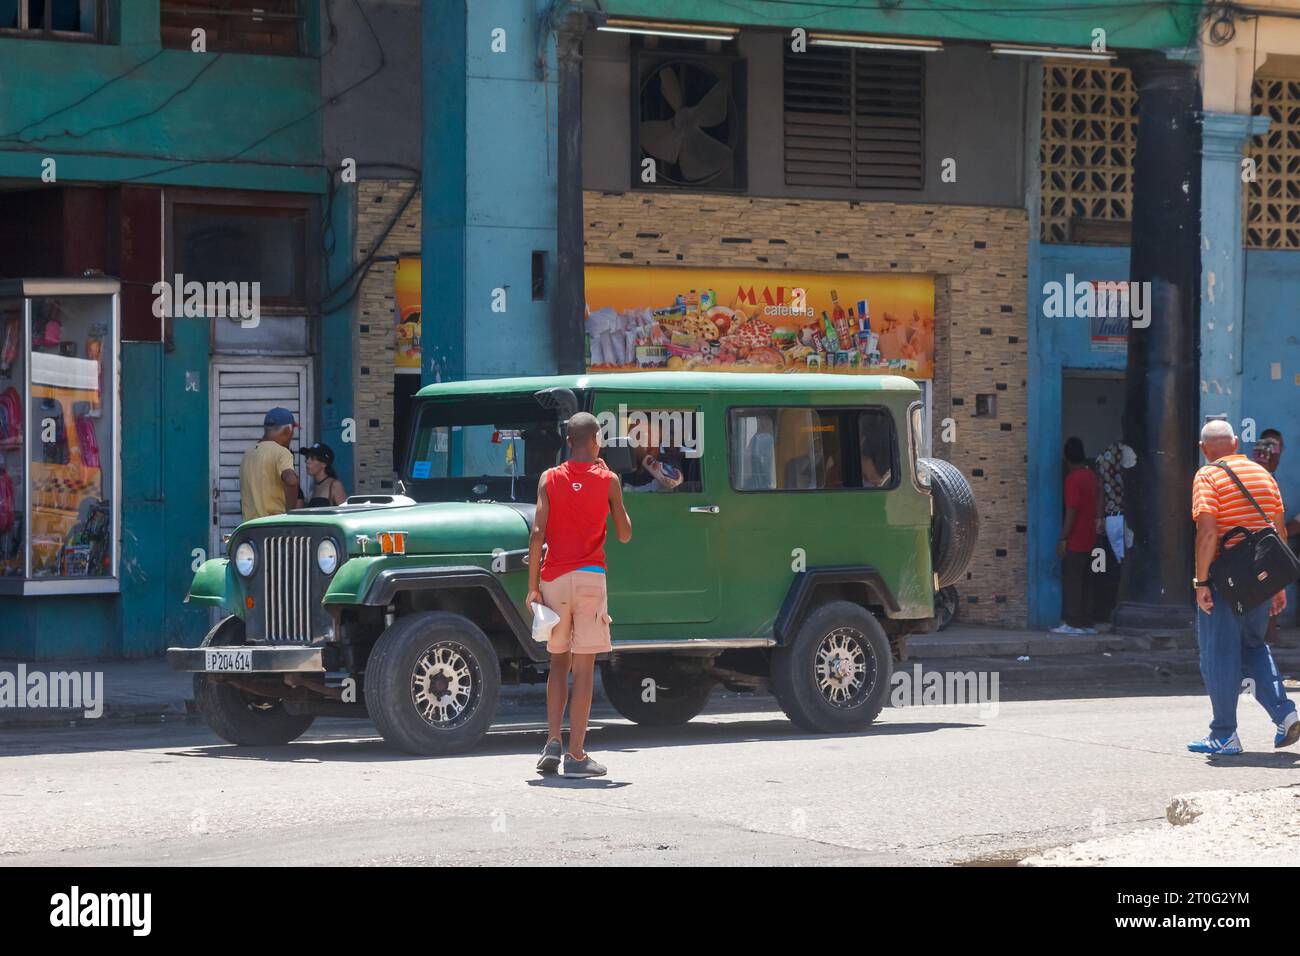 Old vintage jeep style motor vehicle driving on a city street. Cuban people are out and about the urban scene. Stock Photo